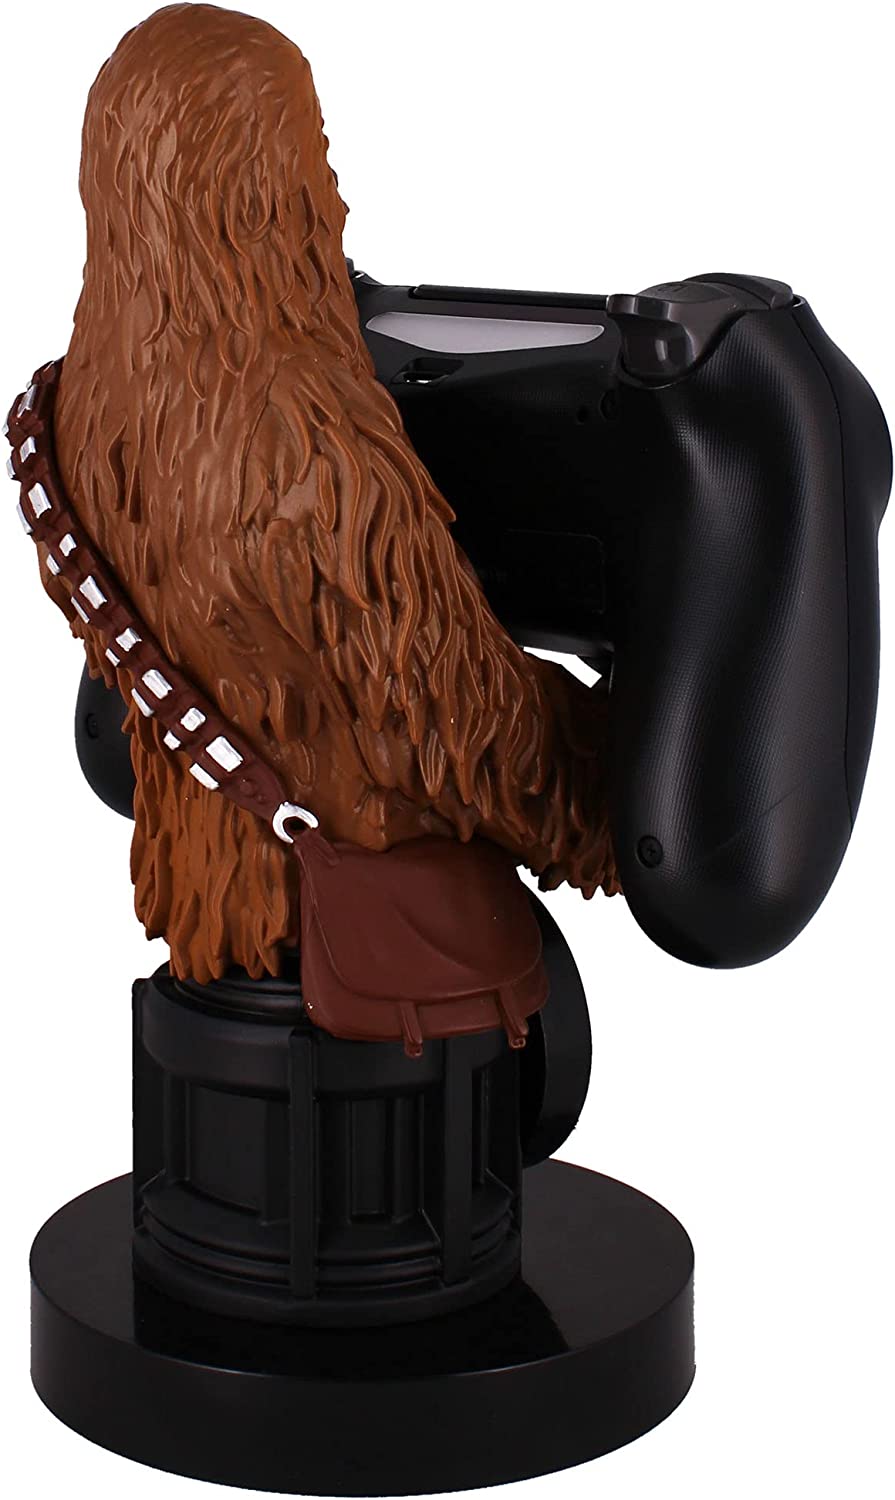 Official Cable Guy Star Wars Chewbacca